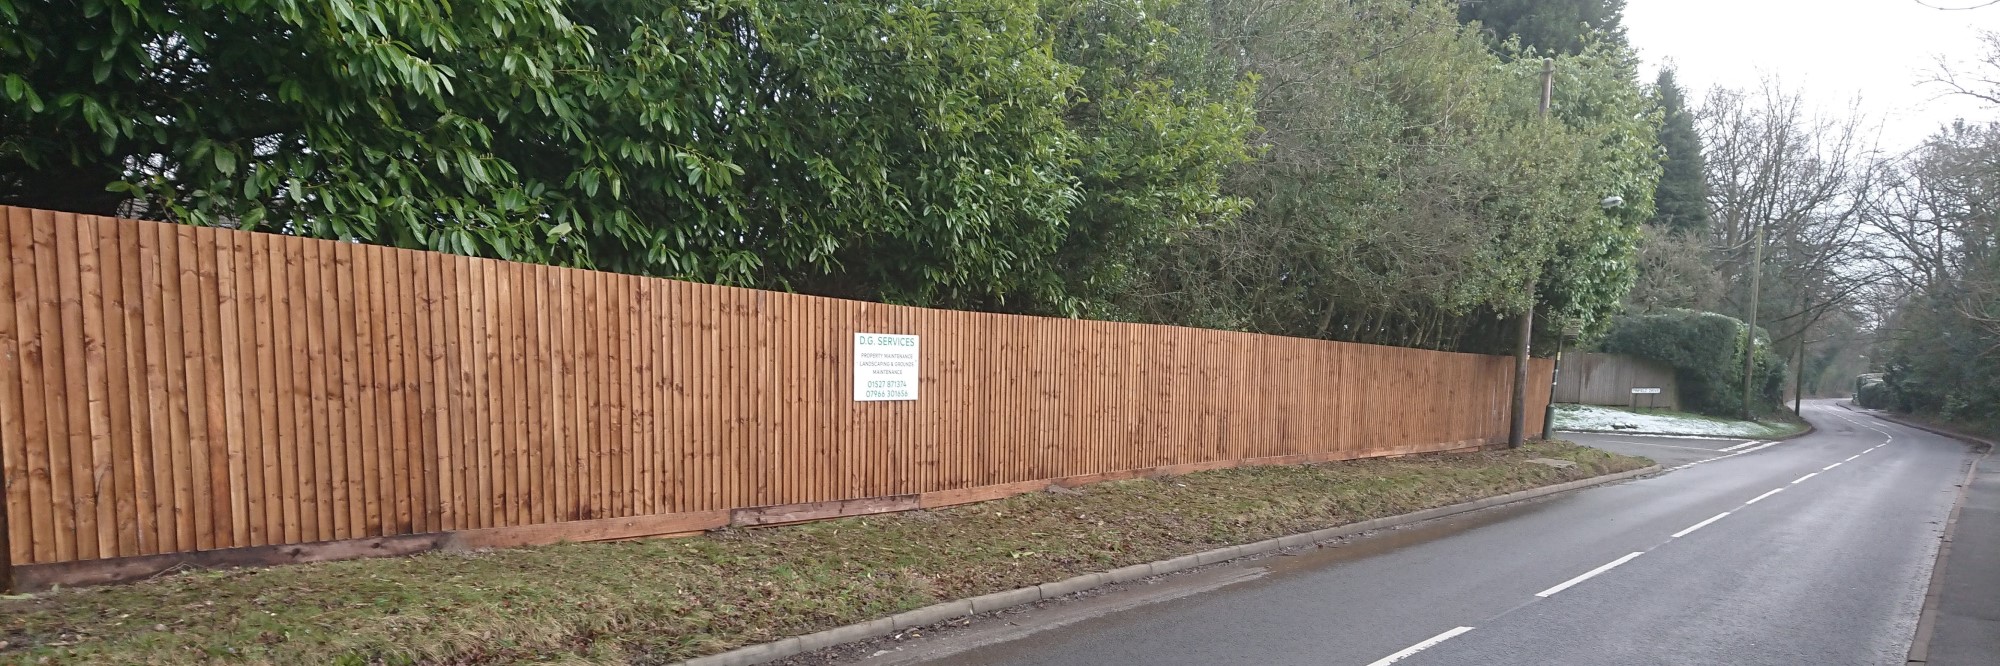 Fencing DG Services Landscaping Gardening Bromsgrove Droitwich